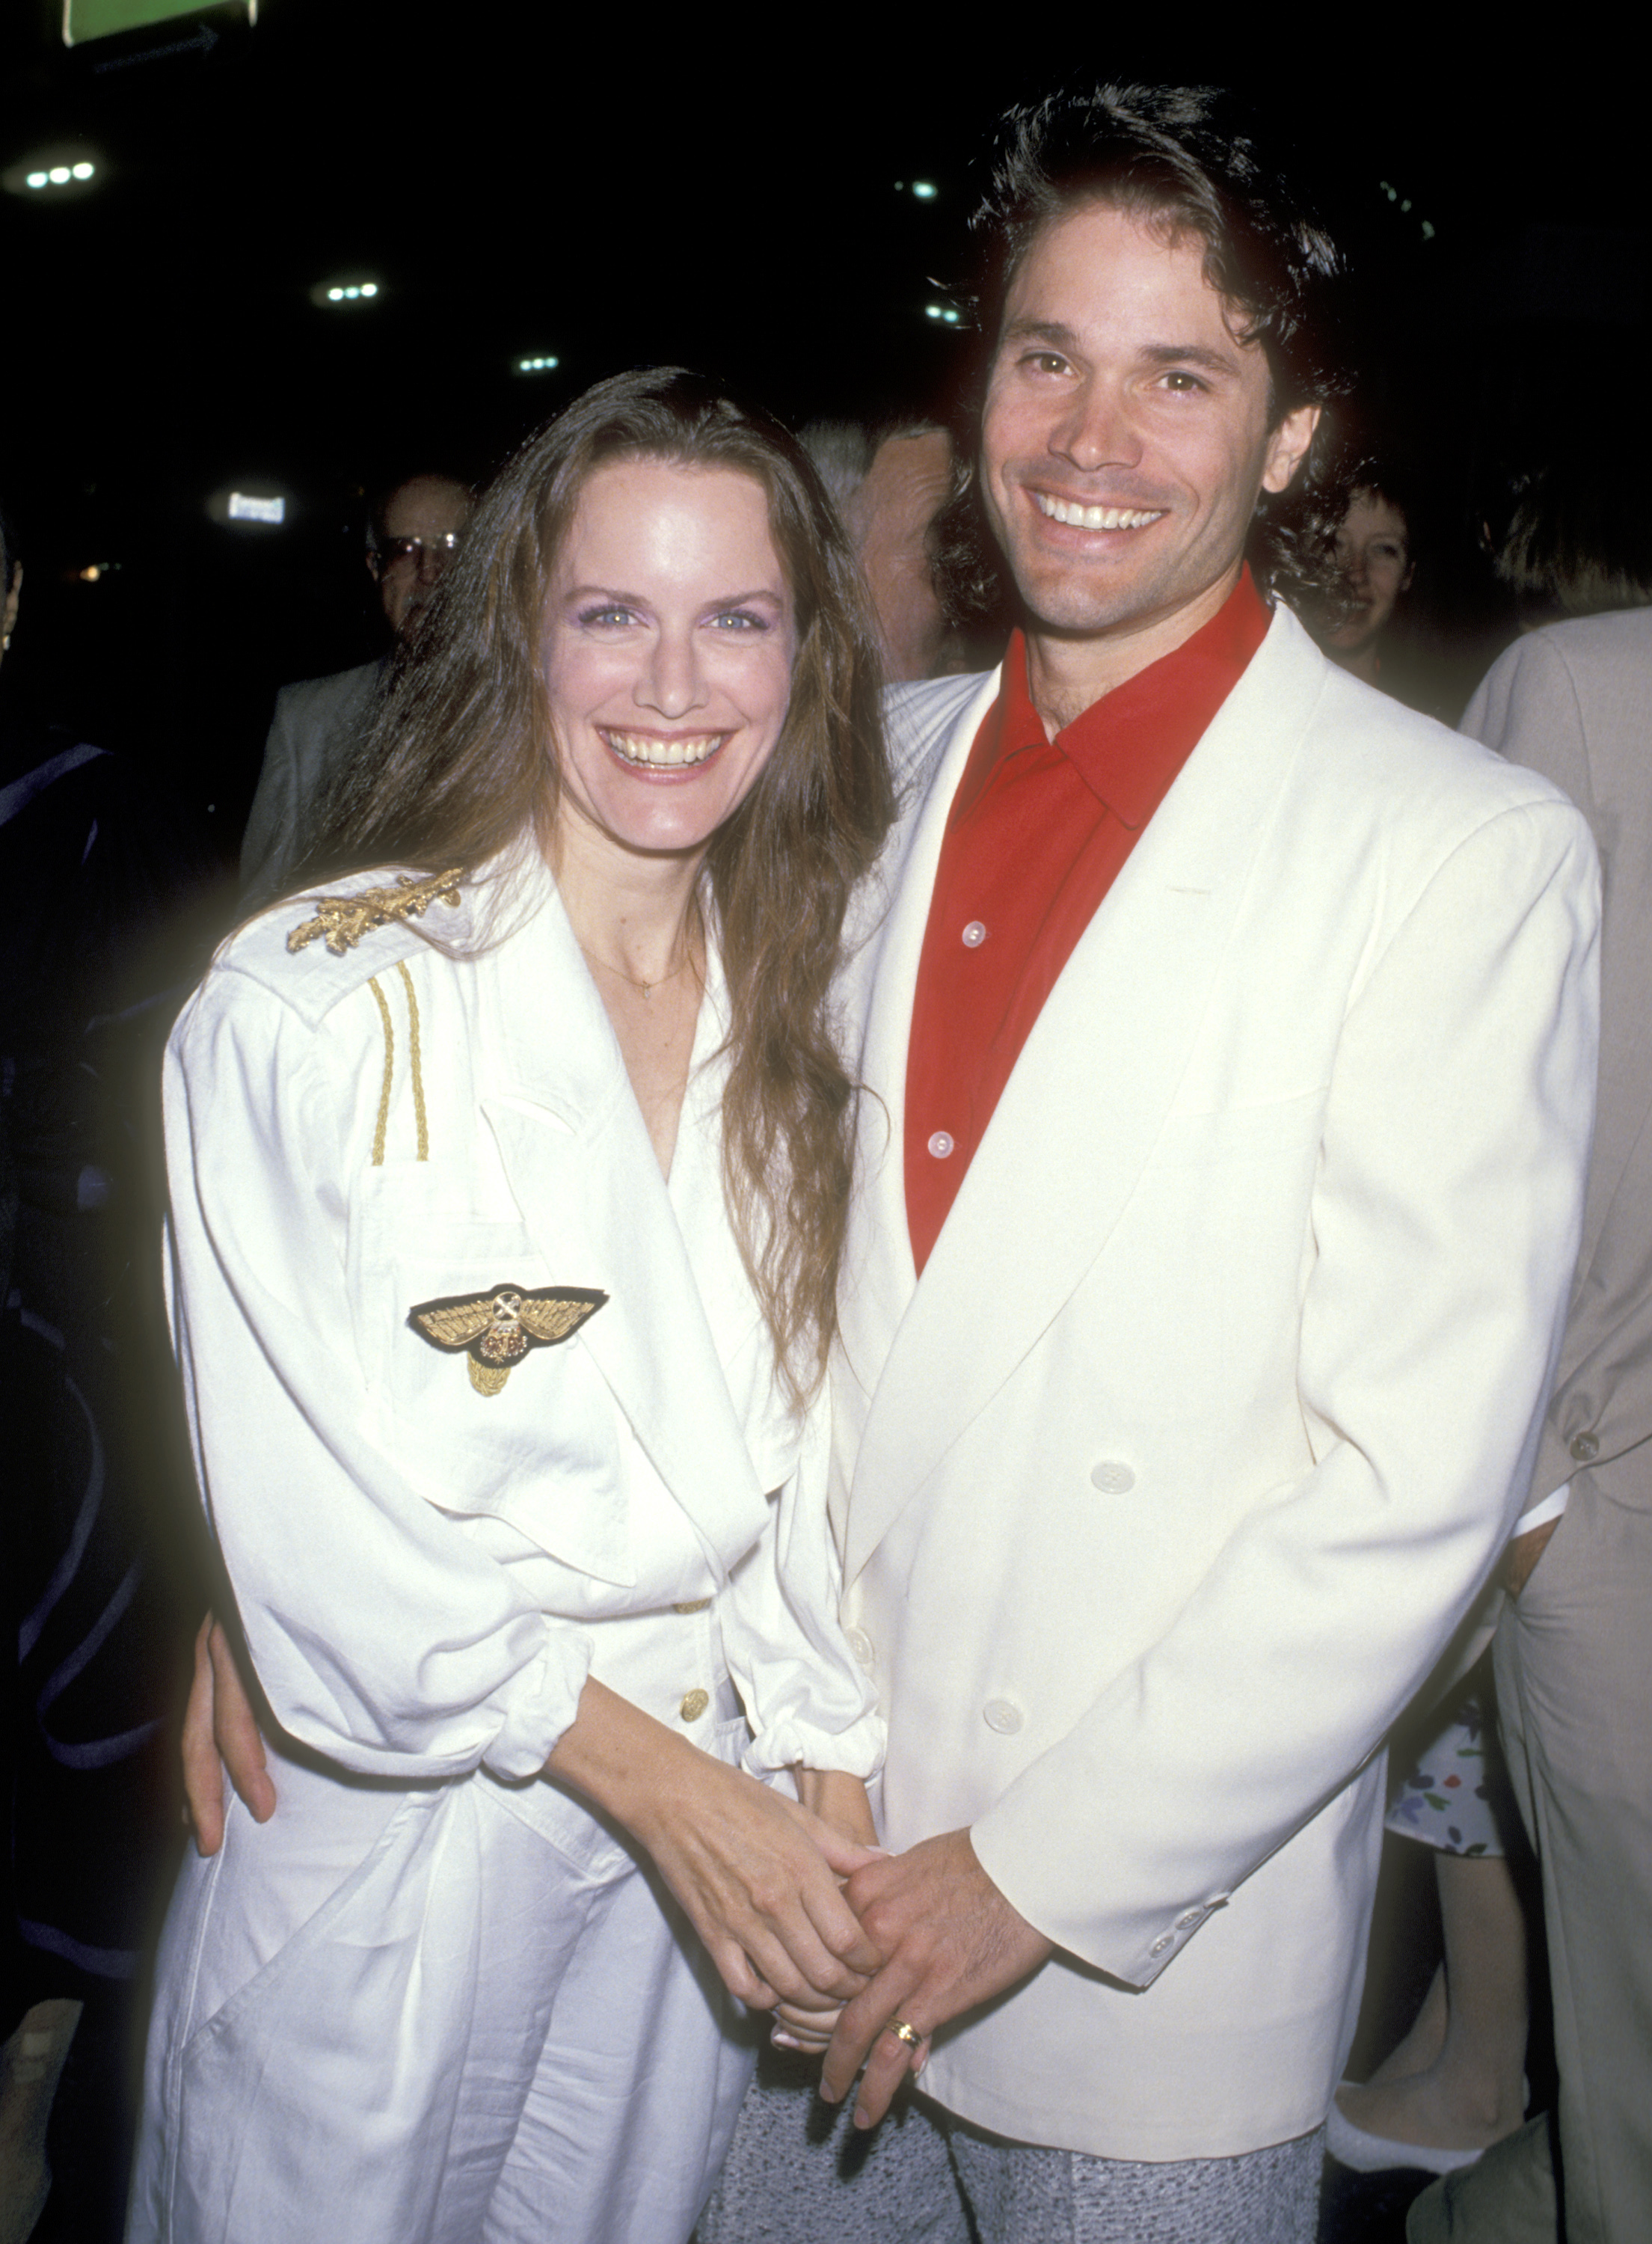 Peter Reckell and Dale Kristien on August 23, 1989 at Ahmanson Theatre, Los Angeles Music Center in Los Angeles, California | Source: Getty Images